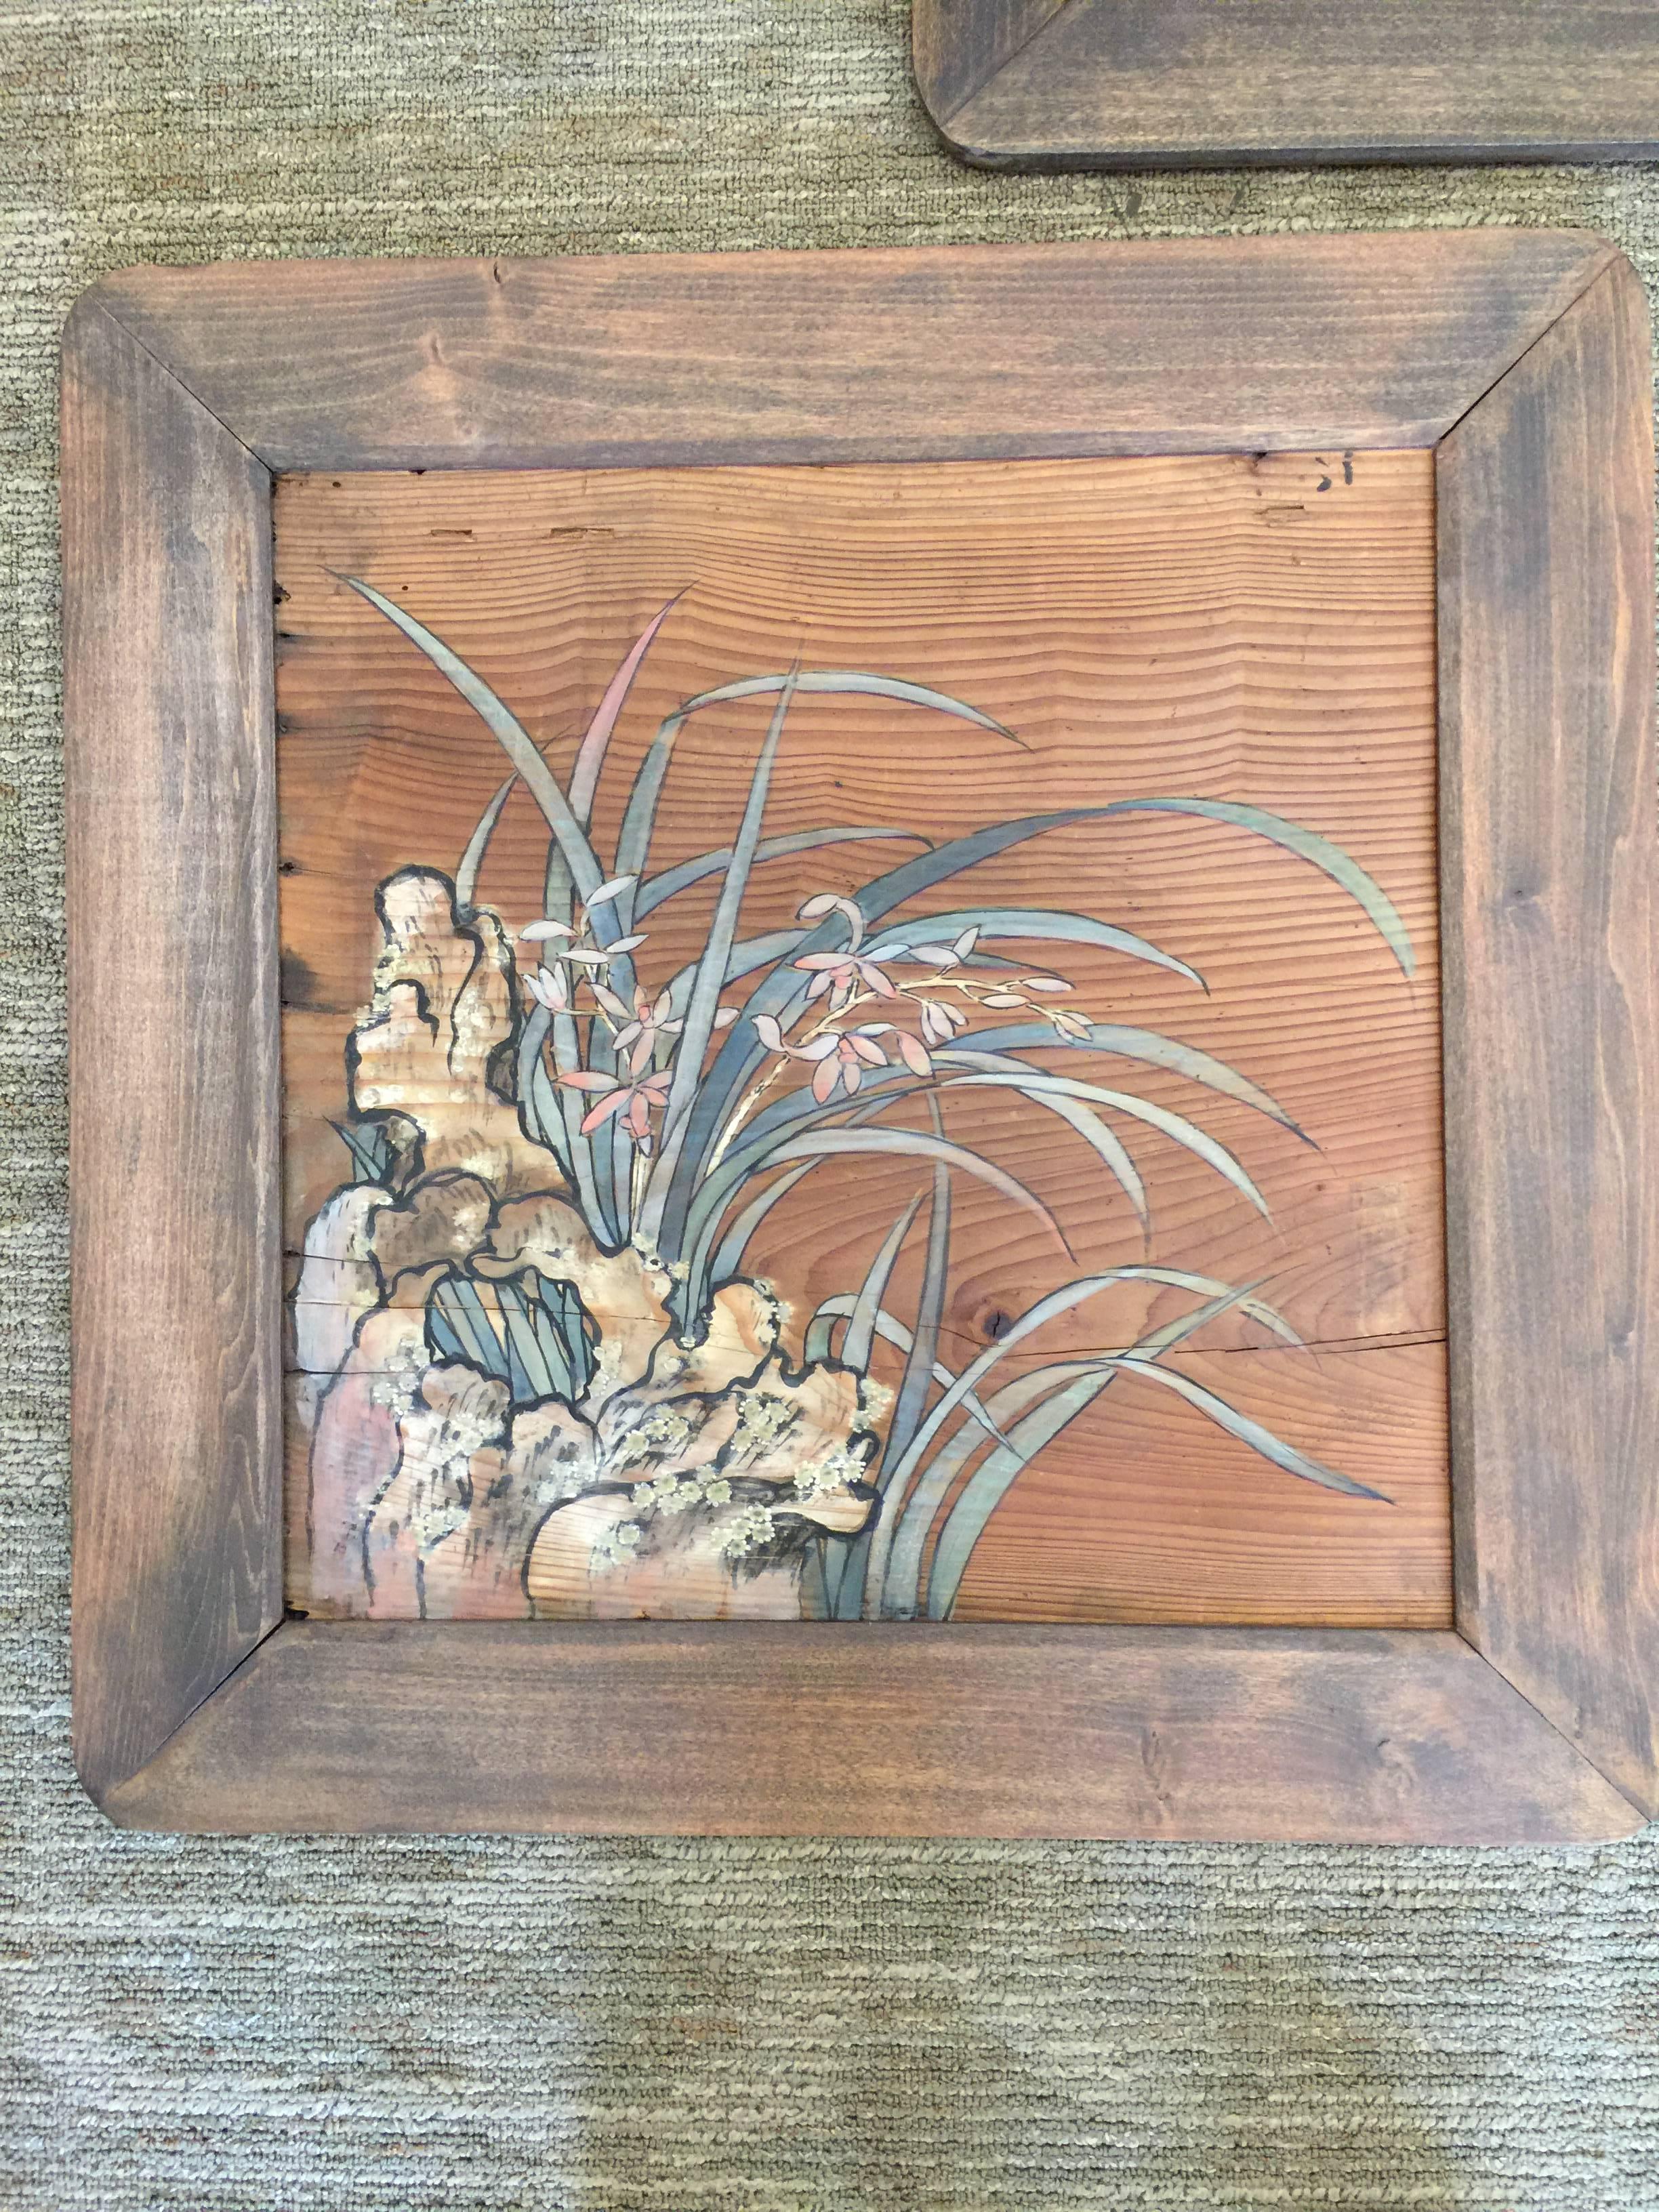 A very pretty and interesting set of three antique Japanese paintings of flowers, on wood panels, framed in simple wood frames.

For sale individually, or as a set.